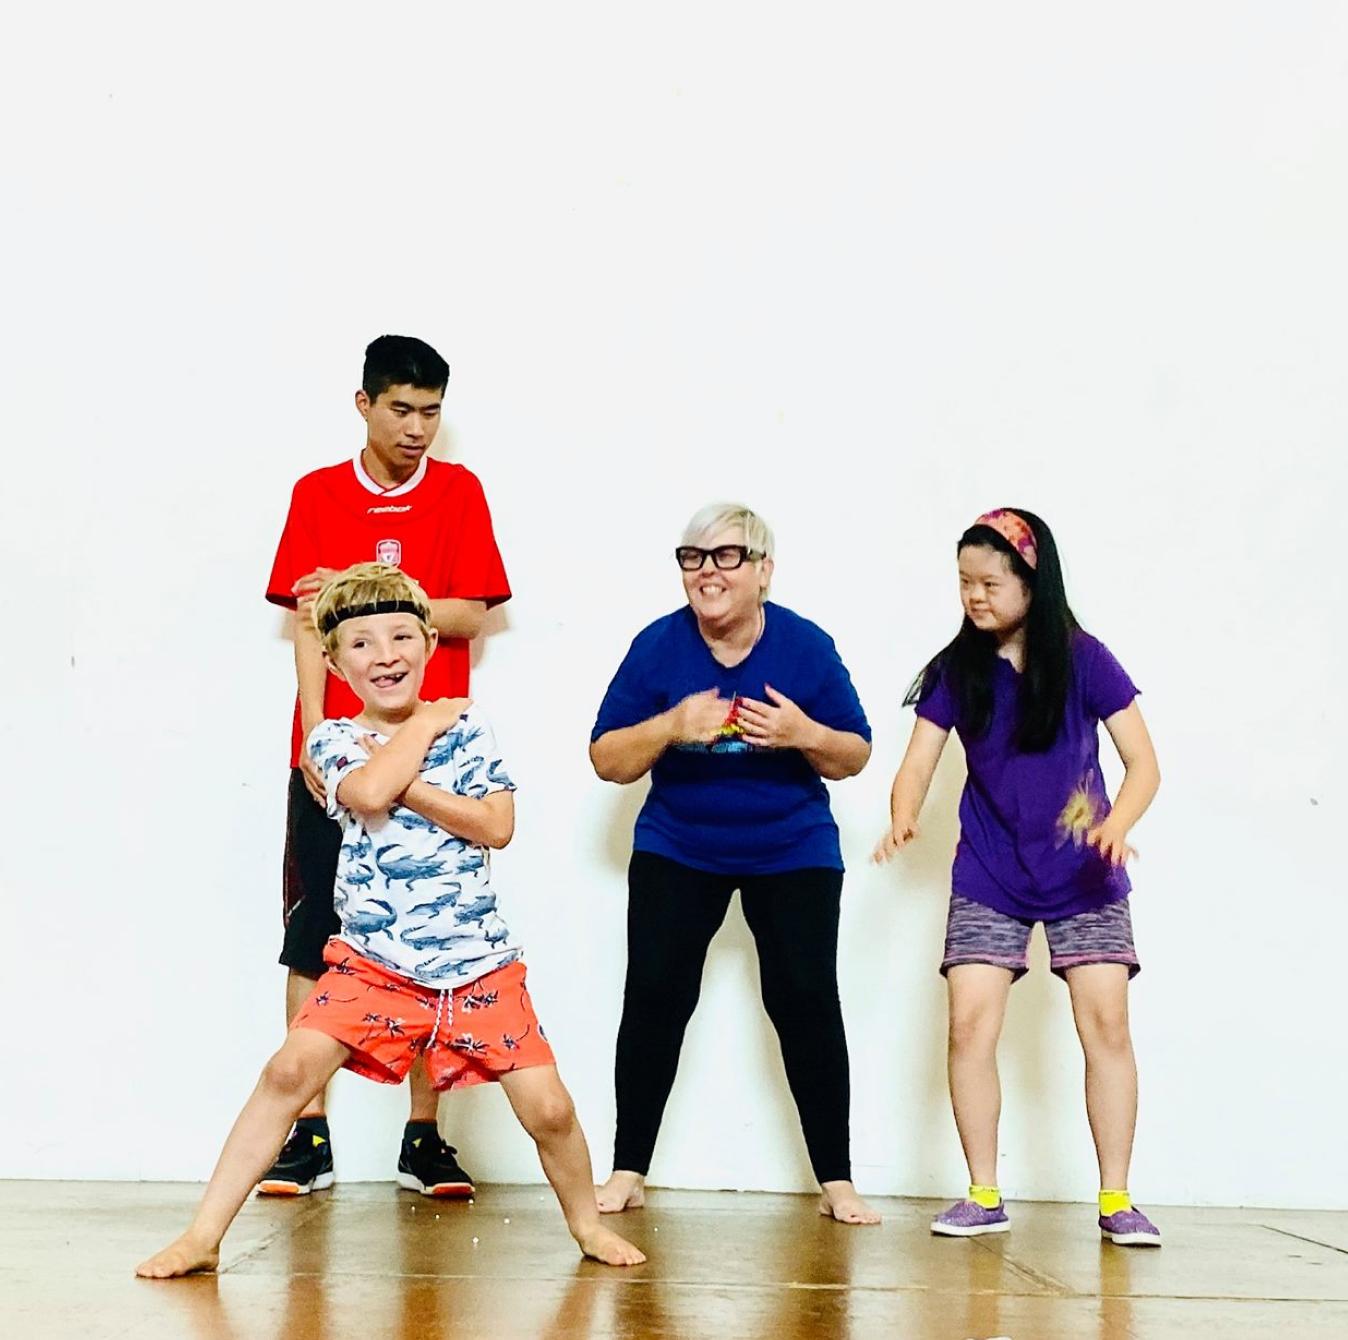 Four dancers of diverse ages and ethnicities are standing in various dance poses, having fun and smiling.